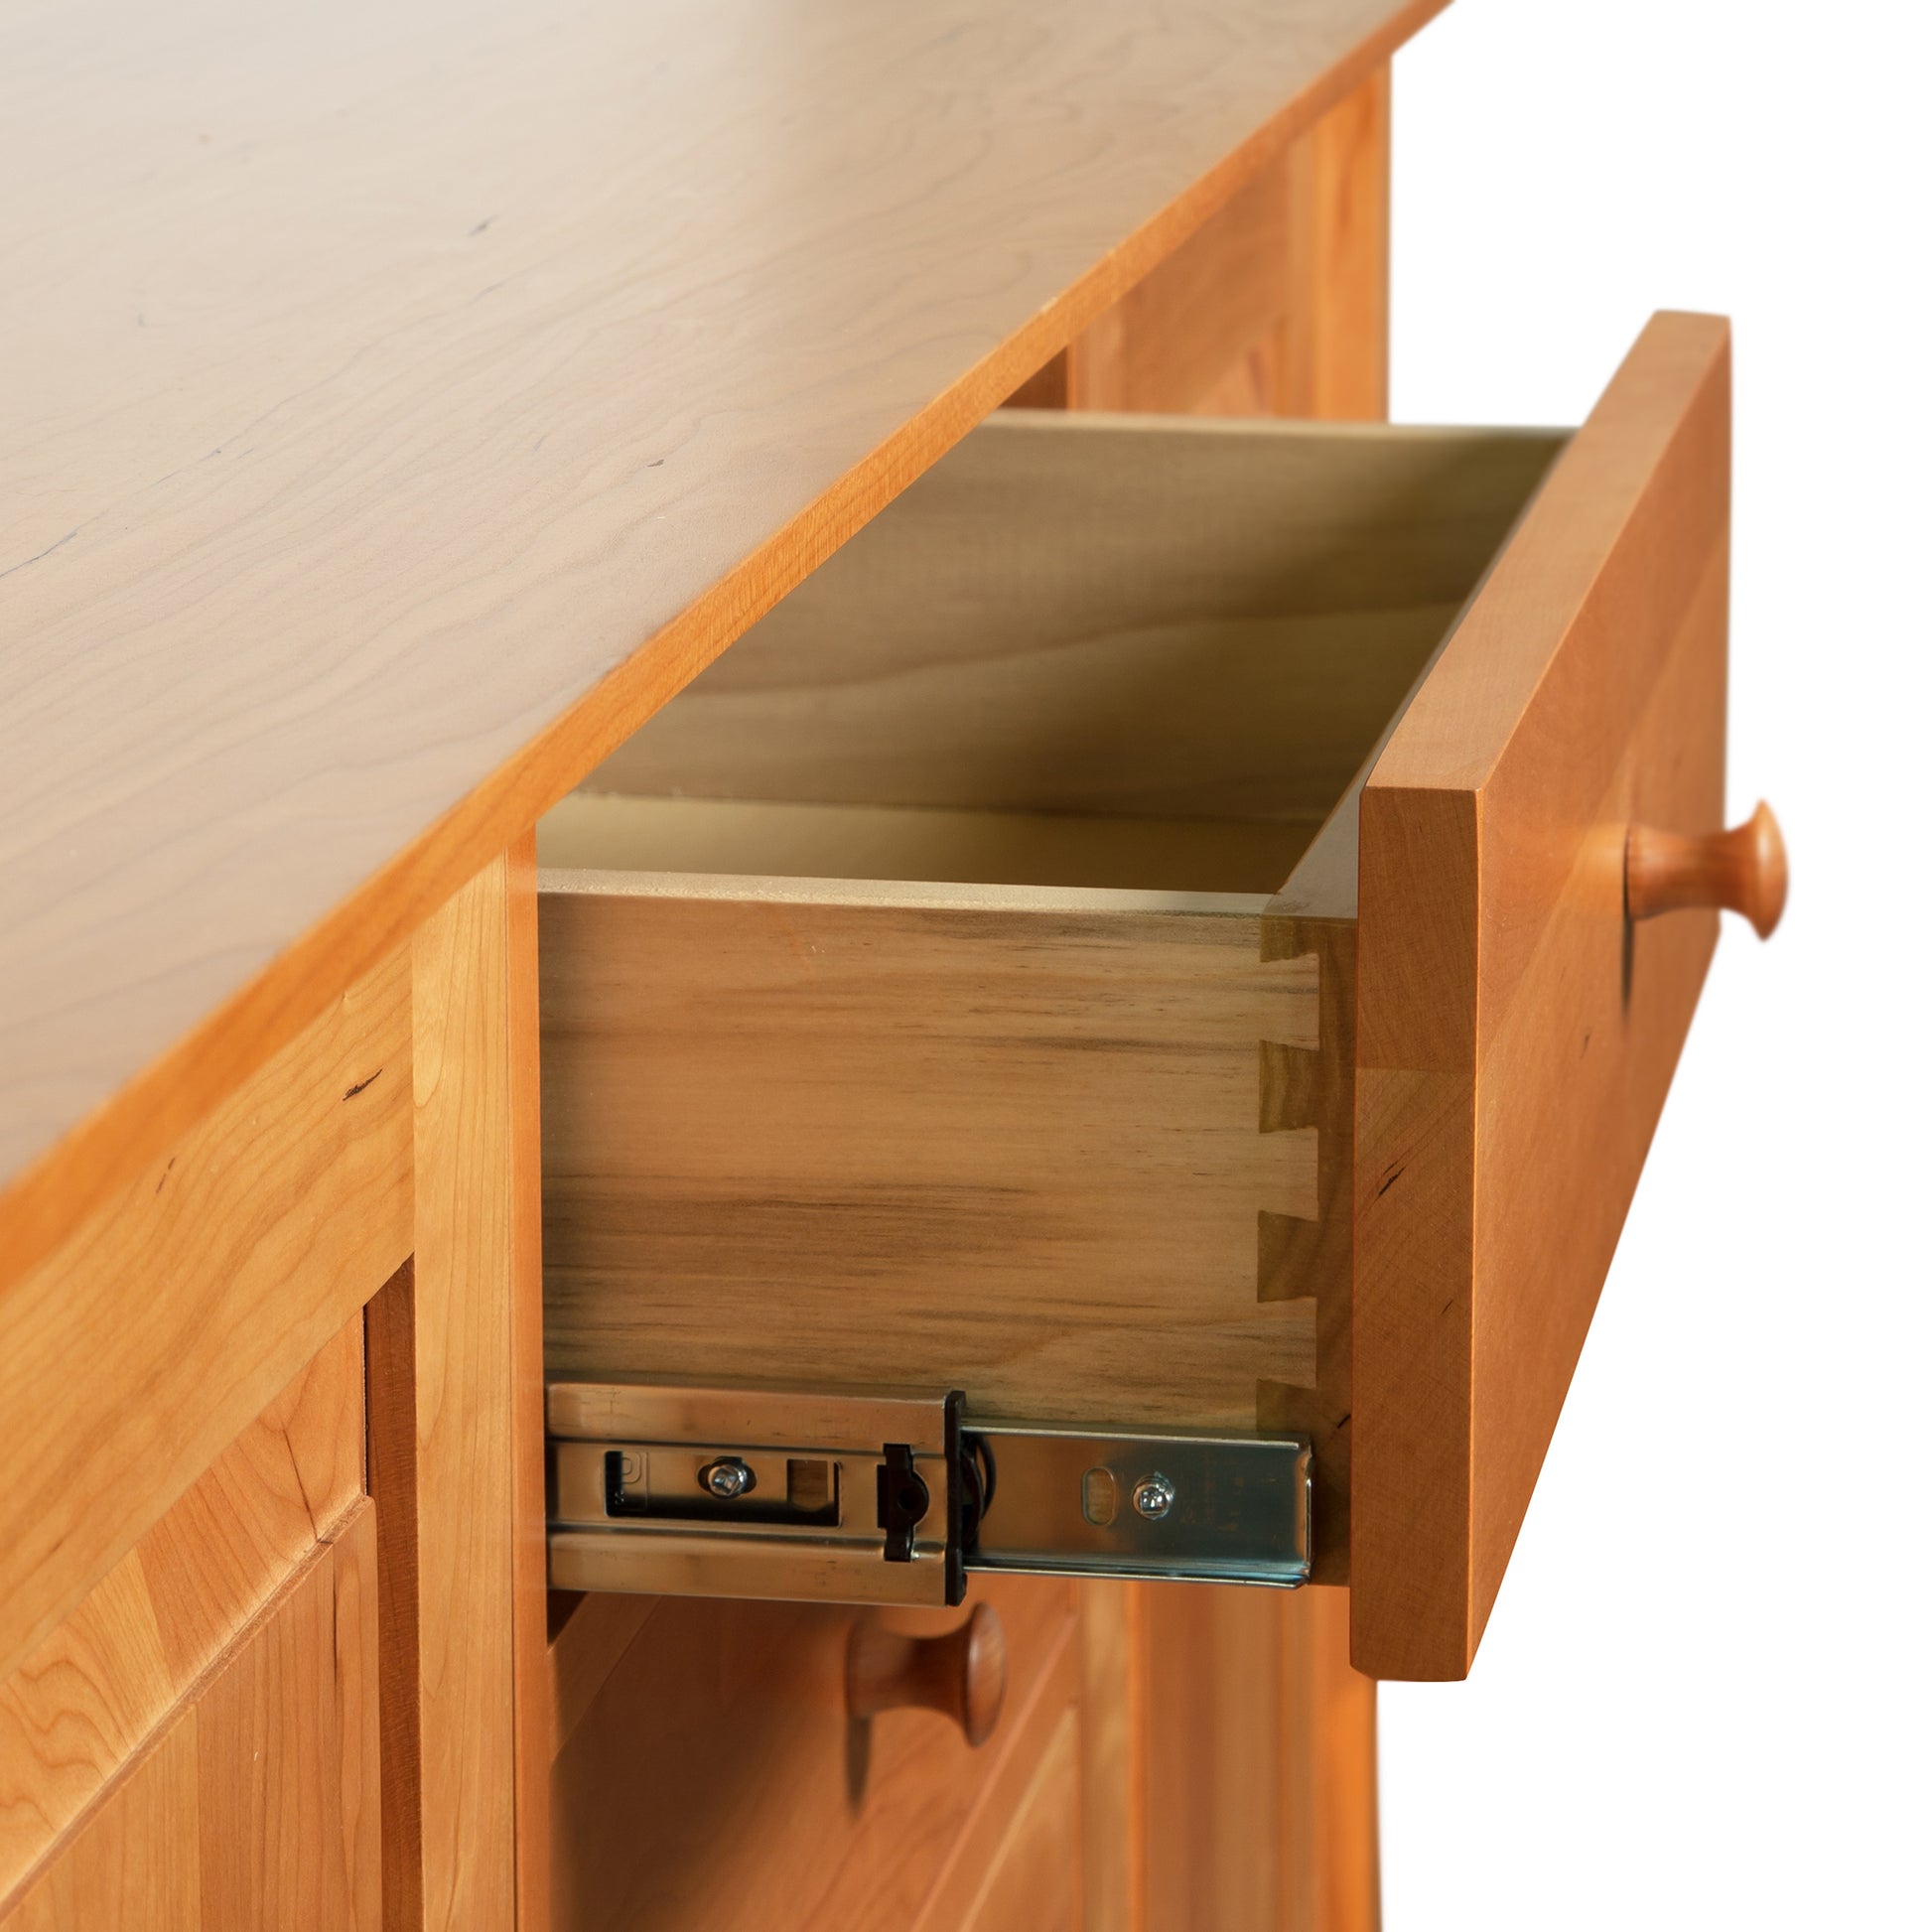 A Lyndon Furniture Classic Shaker Large Buffet, handmade from fine hardwoods, with the added feature of a lock for extra security.